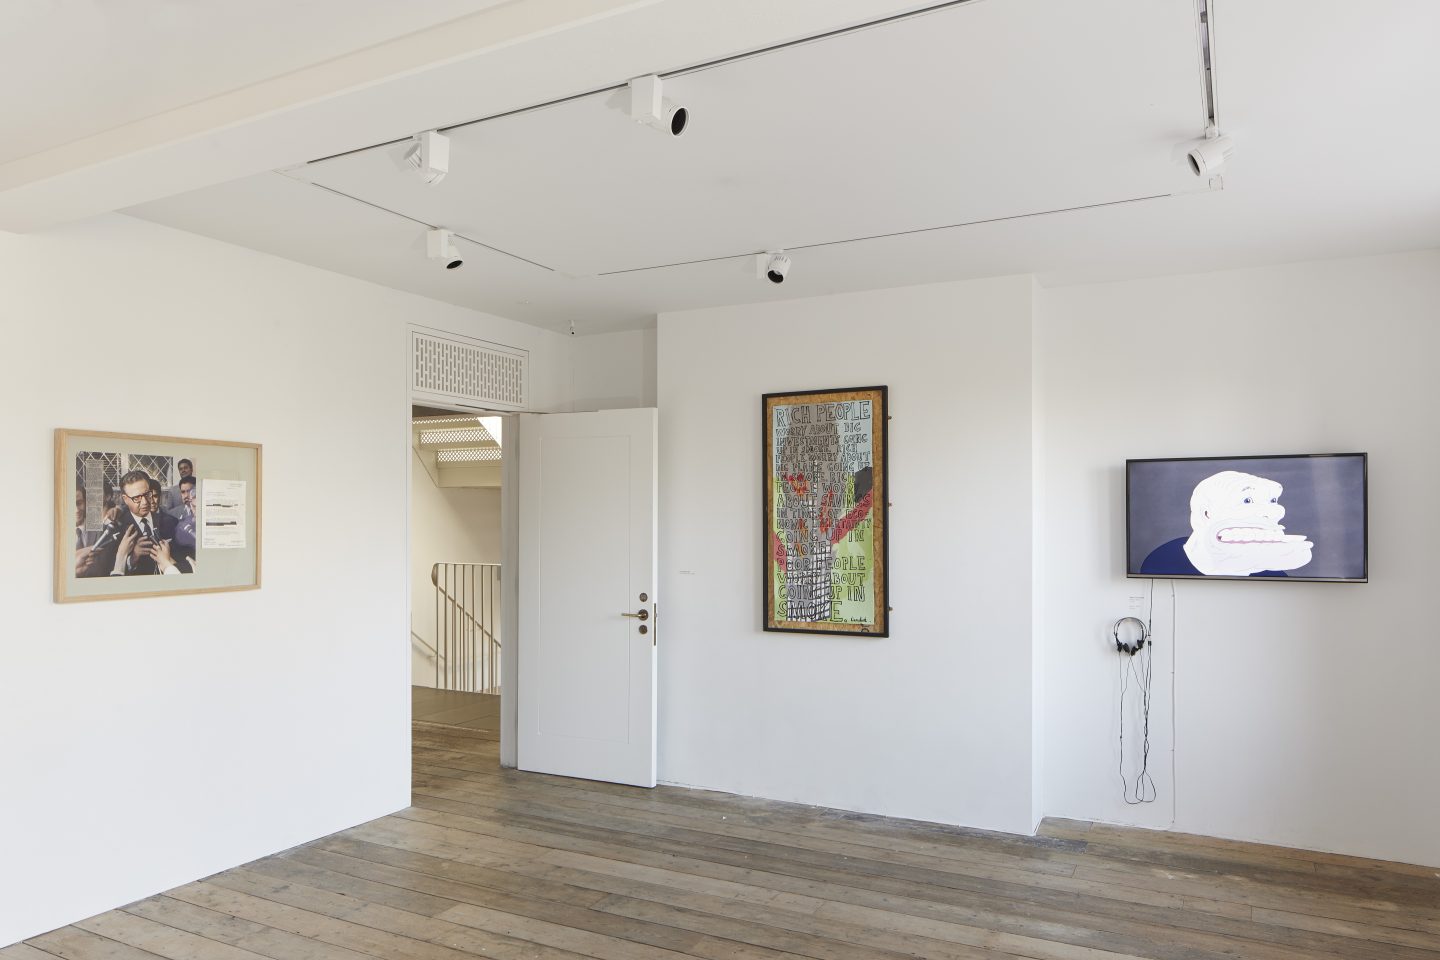 Bloomberg New Contemporaries 2019, installation view at the South London Gallery. Photo: Andy Stagg
Left to right:
